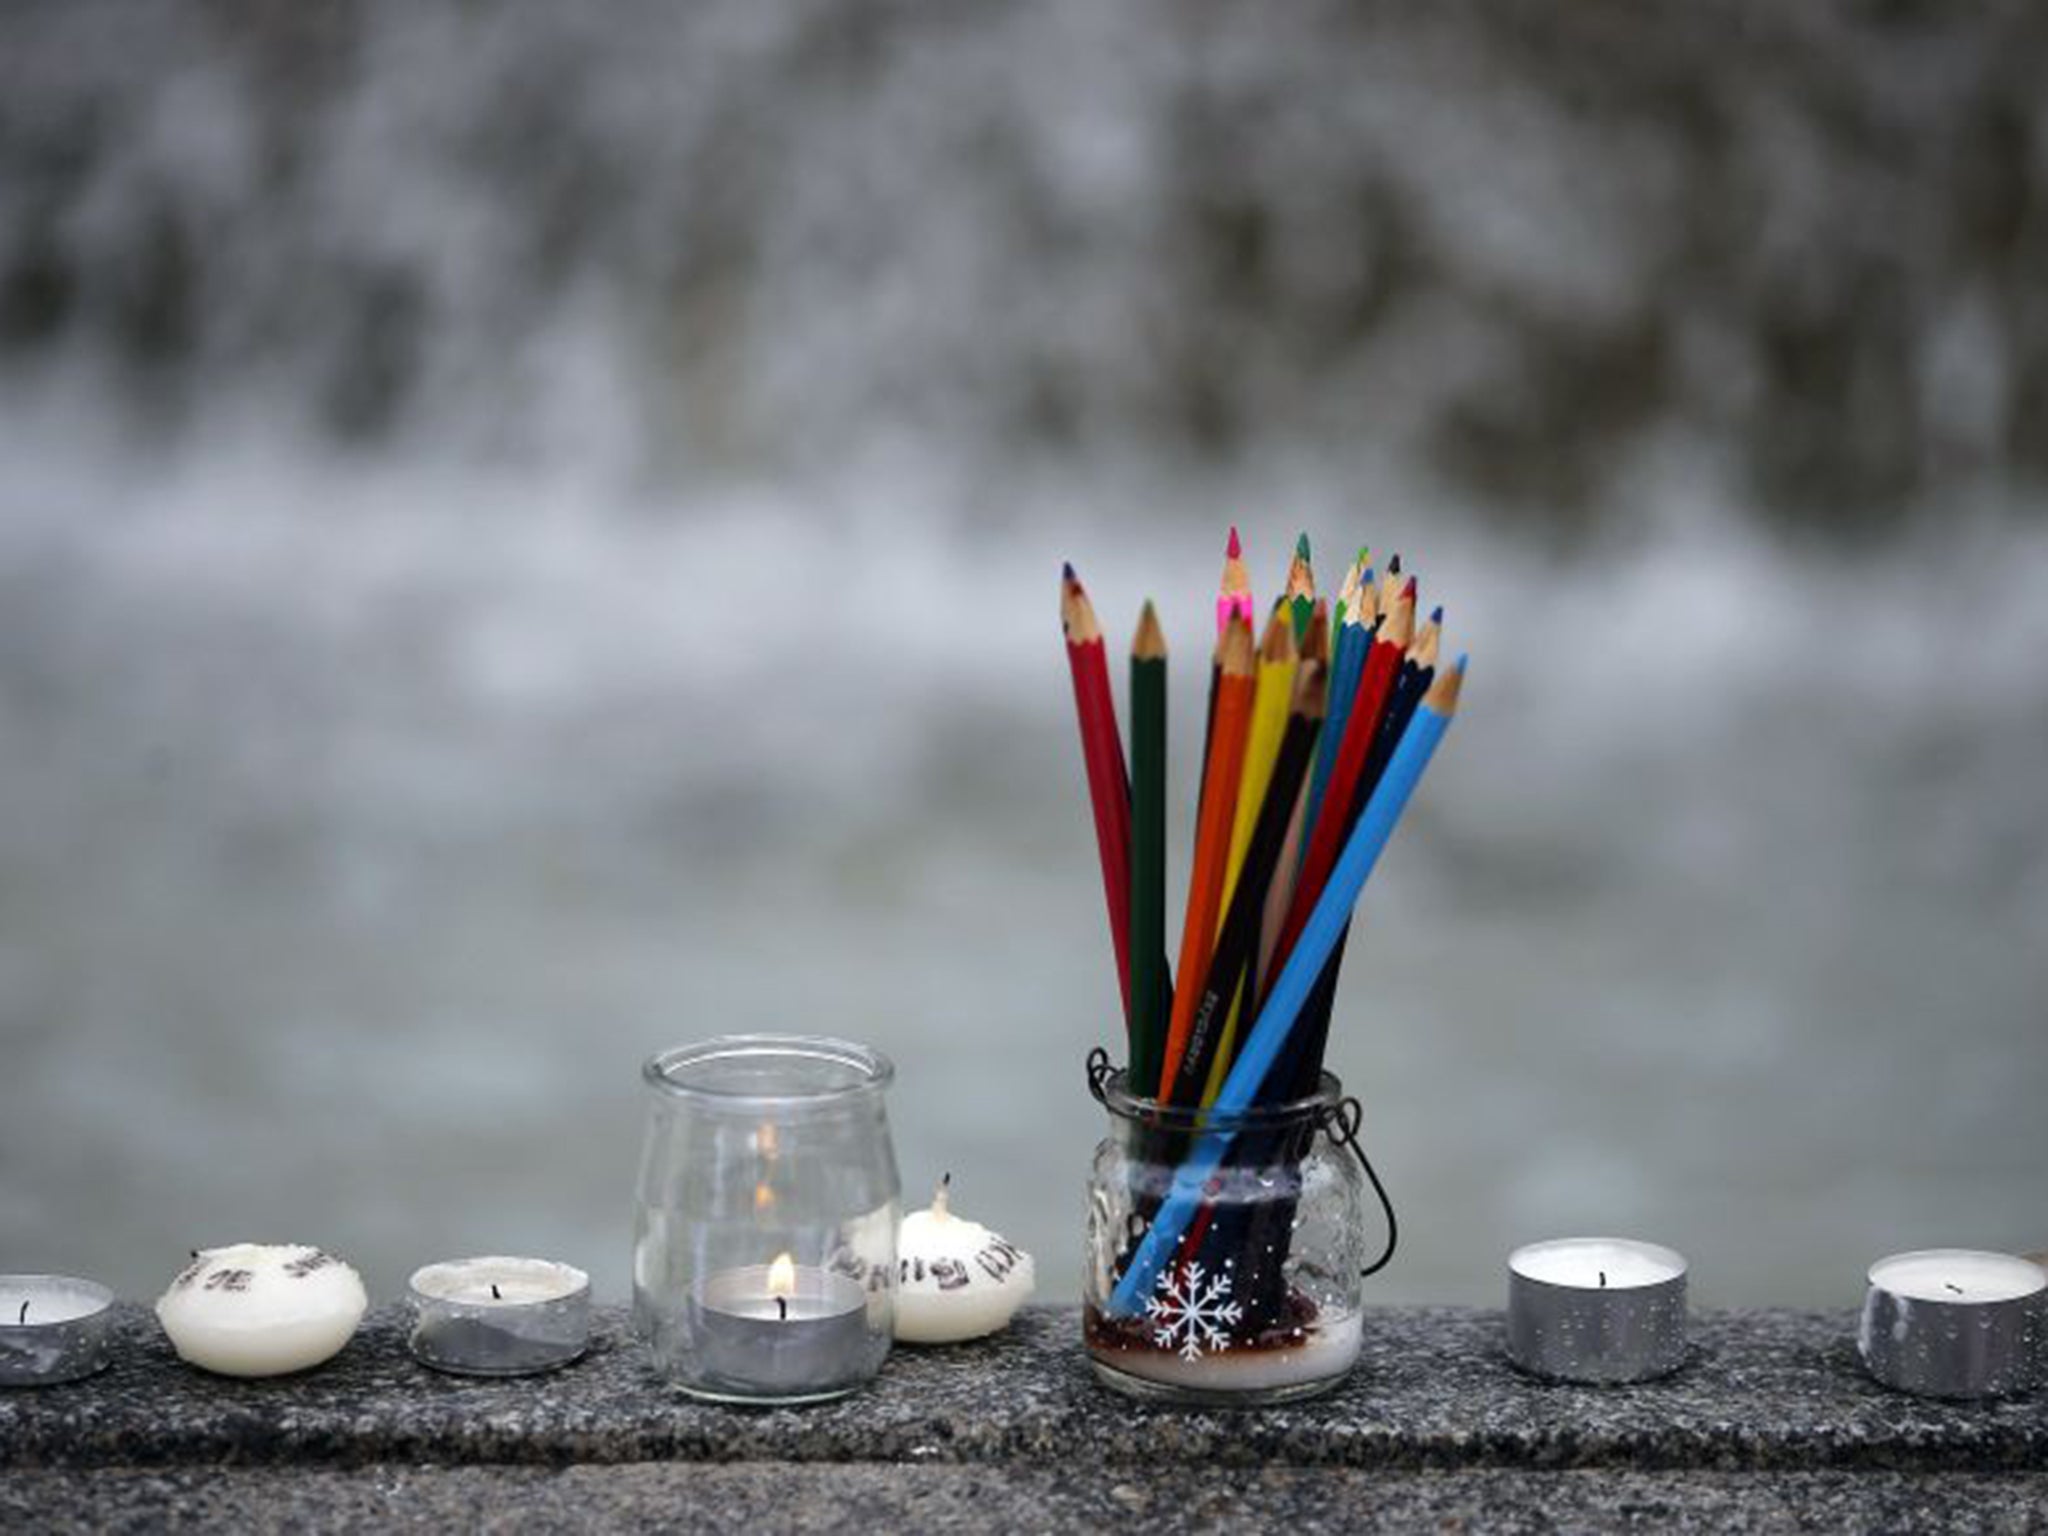 Pencils, representing the freedom of expression, placed in tribute in Nantes (Reuters)